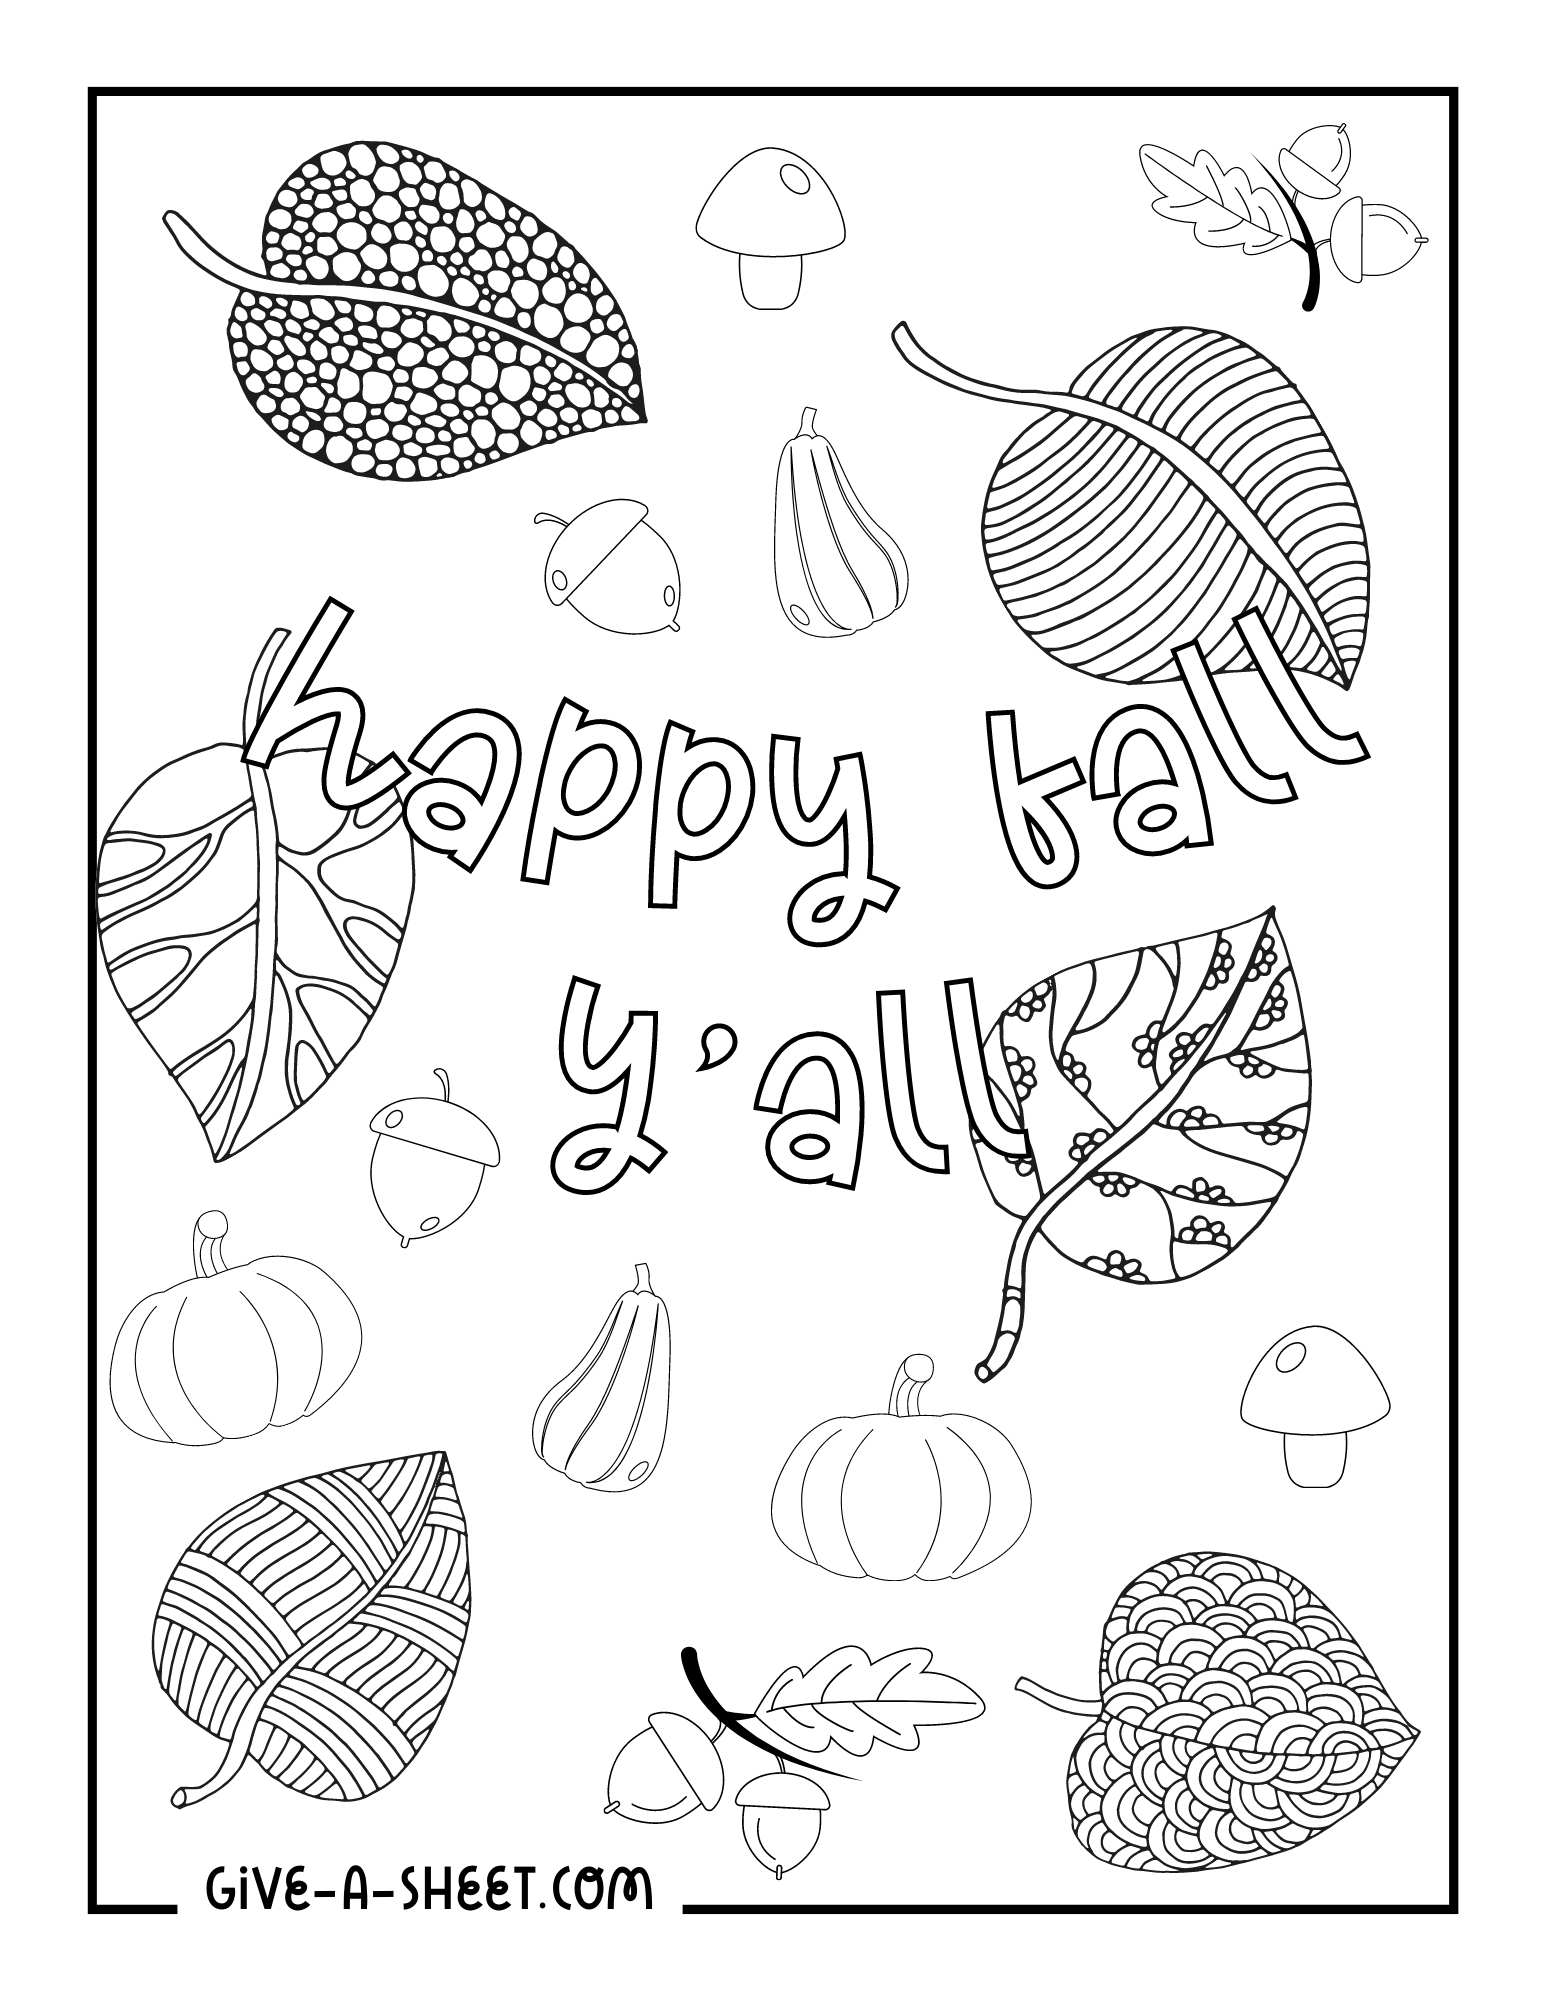 Fall leaf themed coloring page for kids.